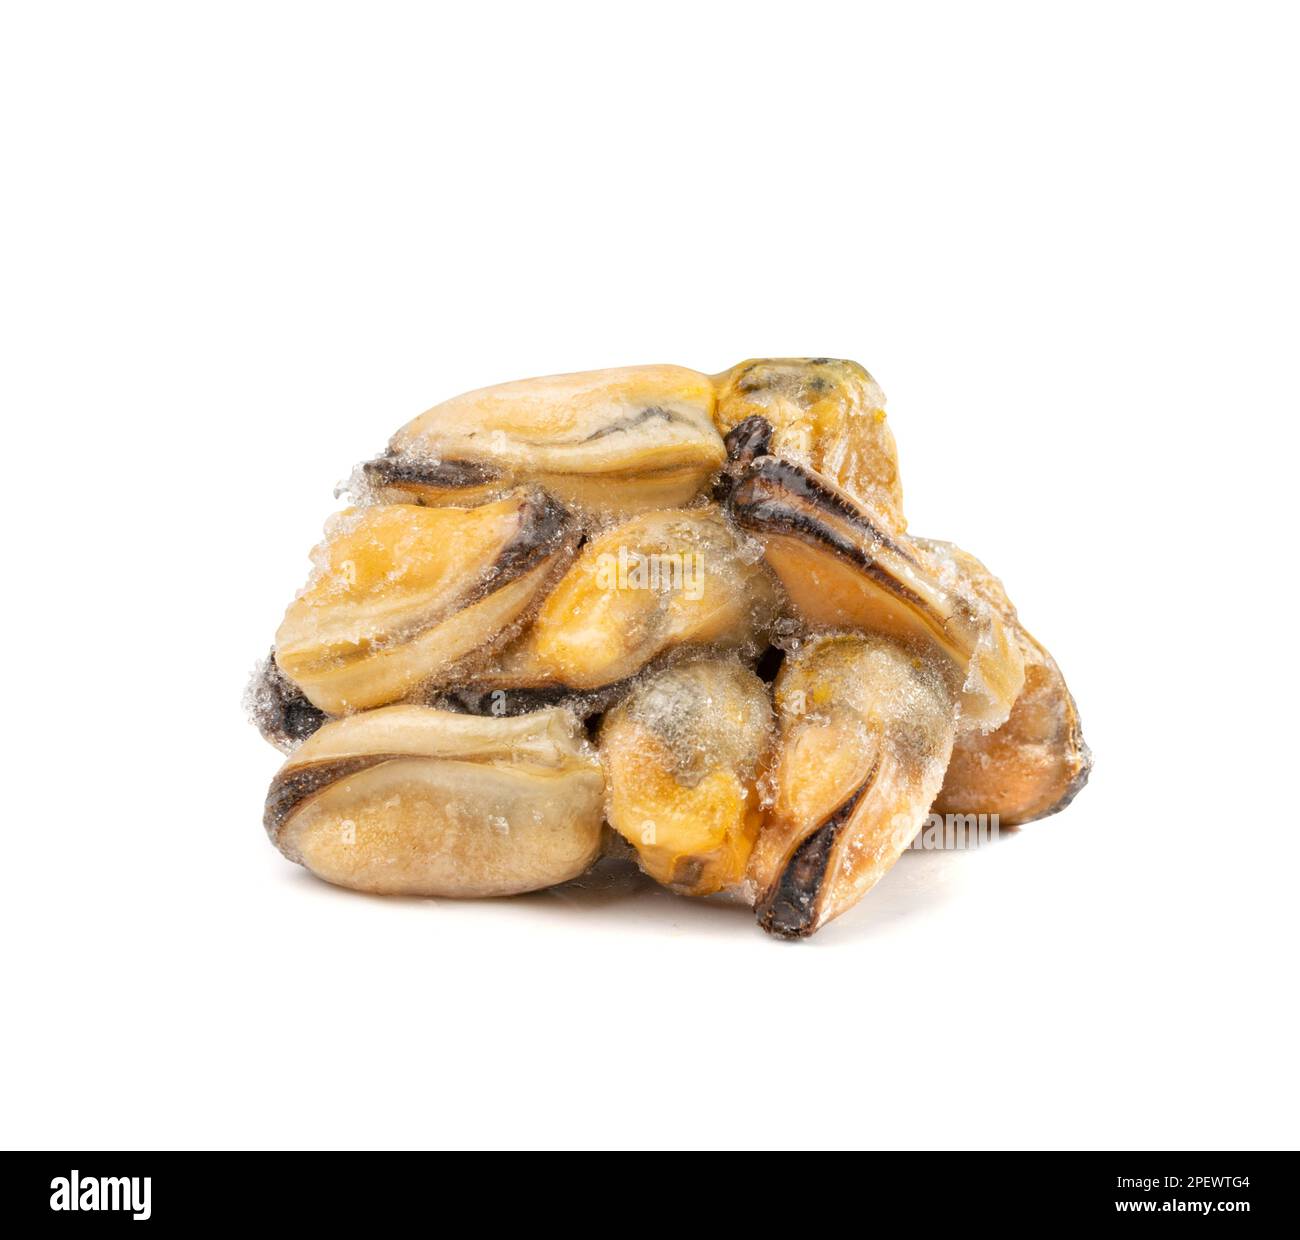 Frozen Mussels Pile Isolated, Unshelled Clam, Frozen Peeled Mussel, Cold Mussels Meat, Iced Seafood, Cooked Shellfish on White Background Stock Photo